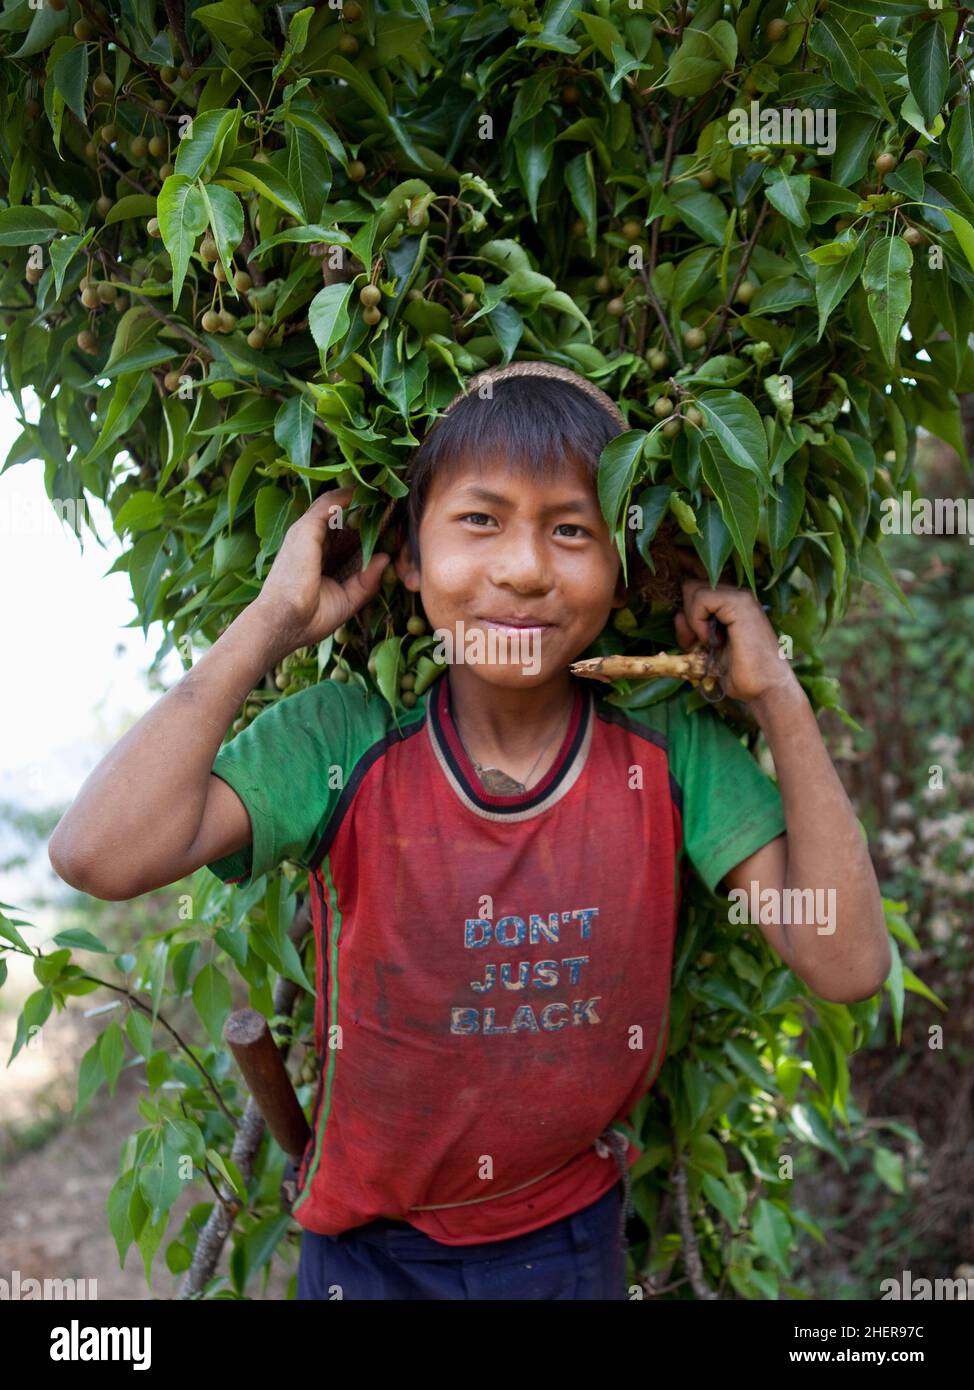 13 year old Vishnu hauling harvested 'mayale' branches to use as cattle feed in Tansen, Nepal. Stock Photo